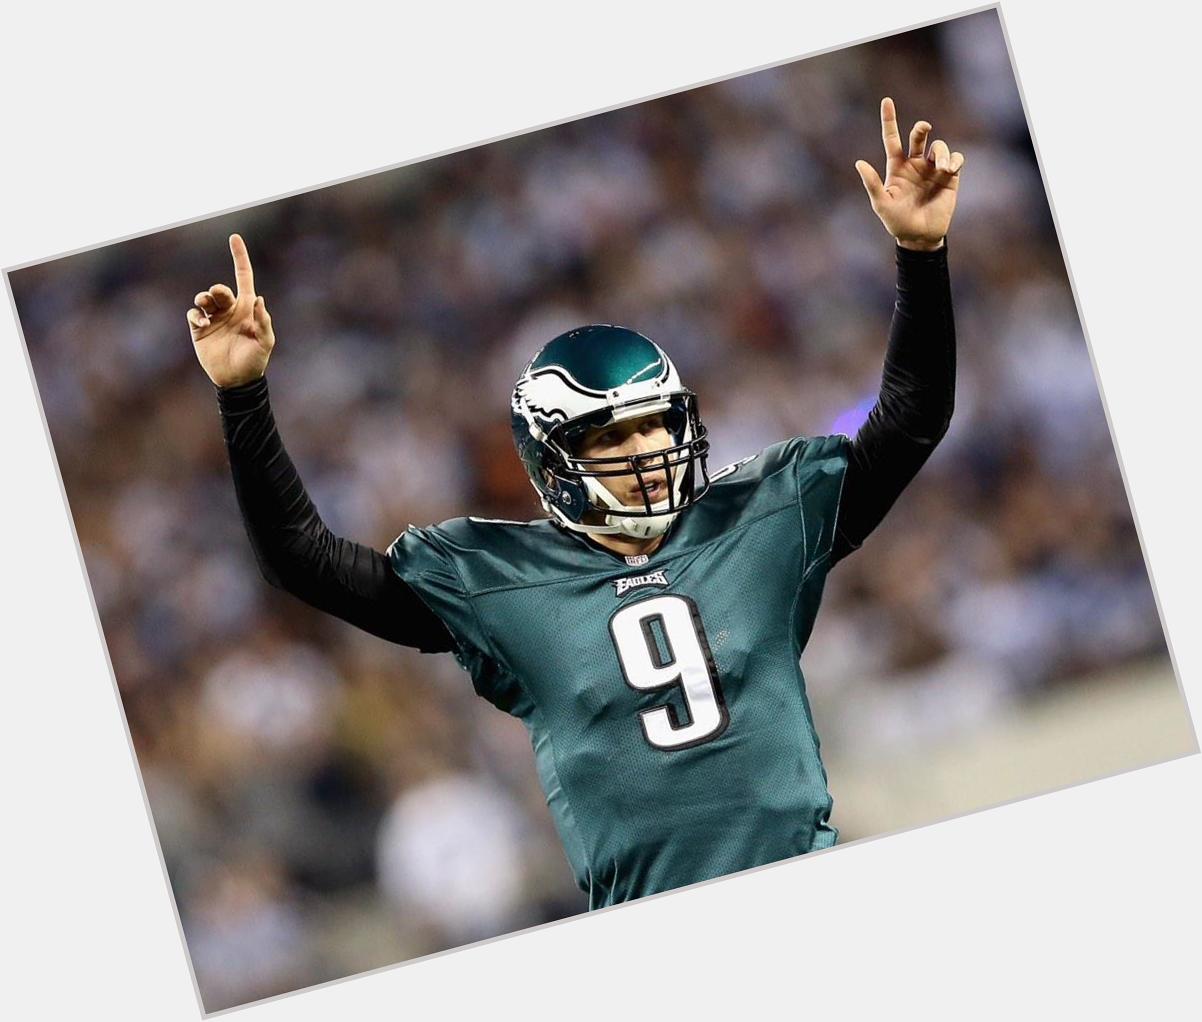 Happy Birthday to Nick Foles. I\m such a huge fan and I hope you had a great day  